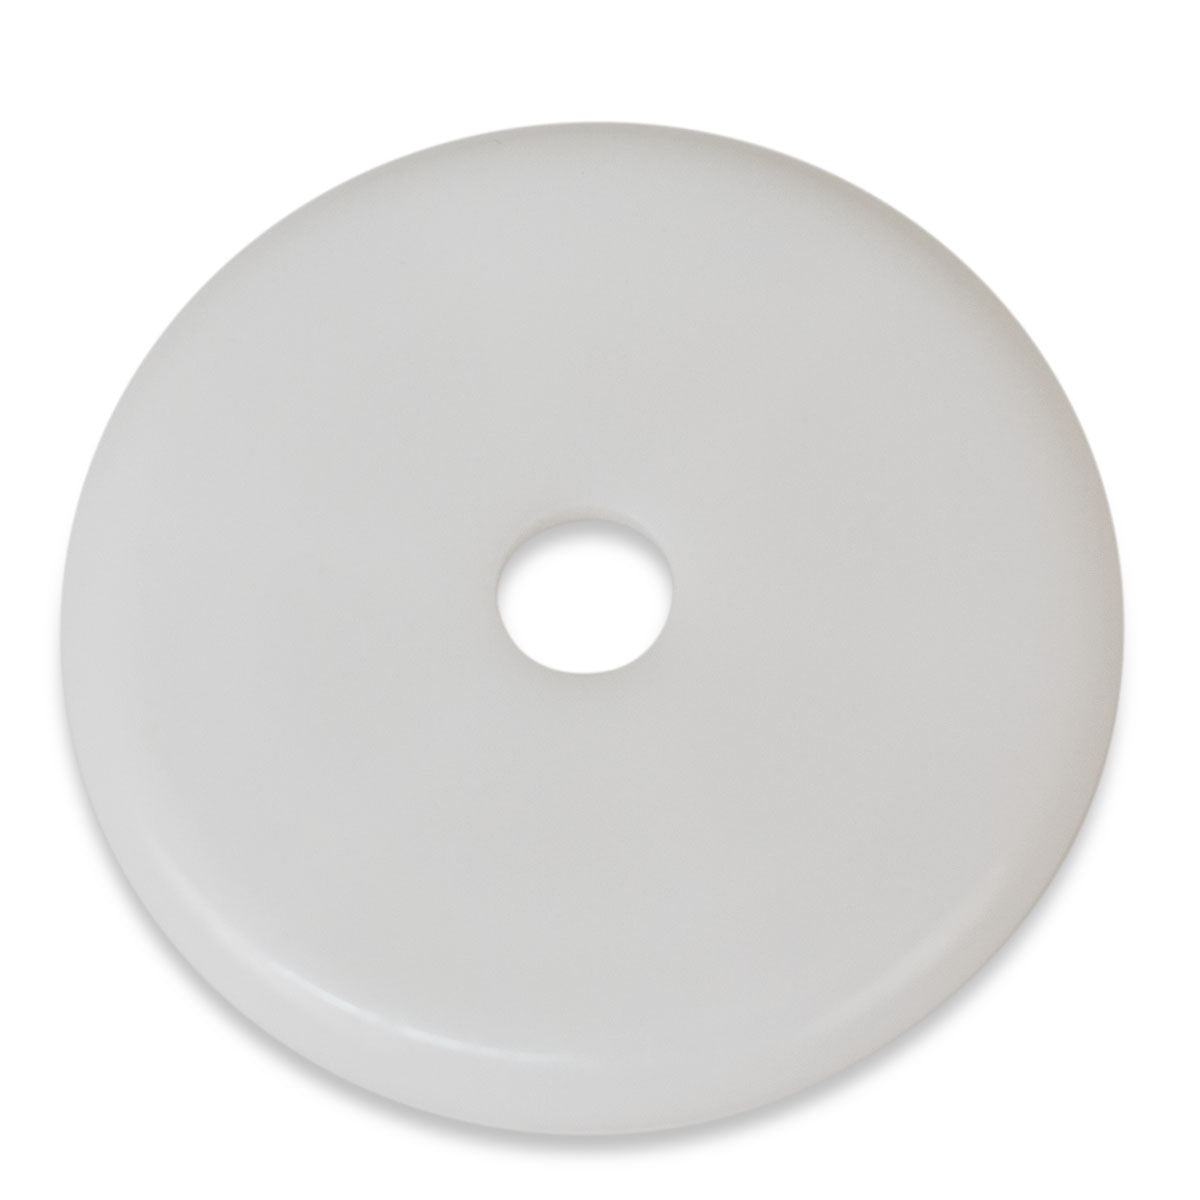 Plastic Button Disk for Hand Pump on Filter Press